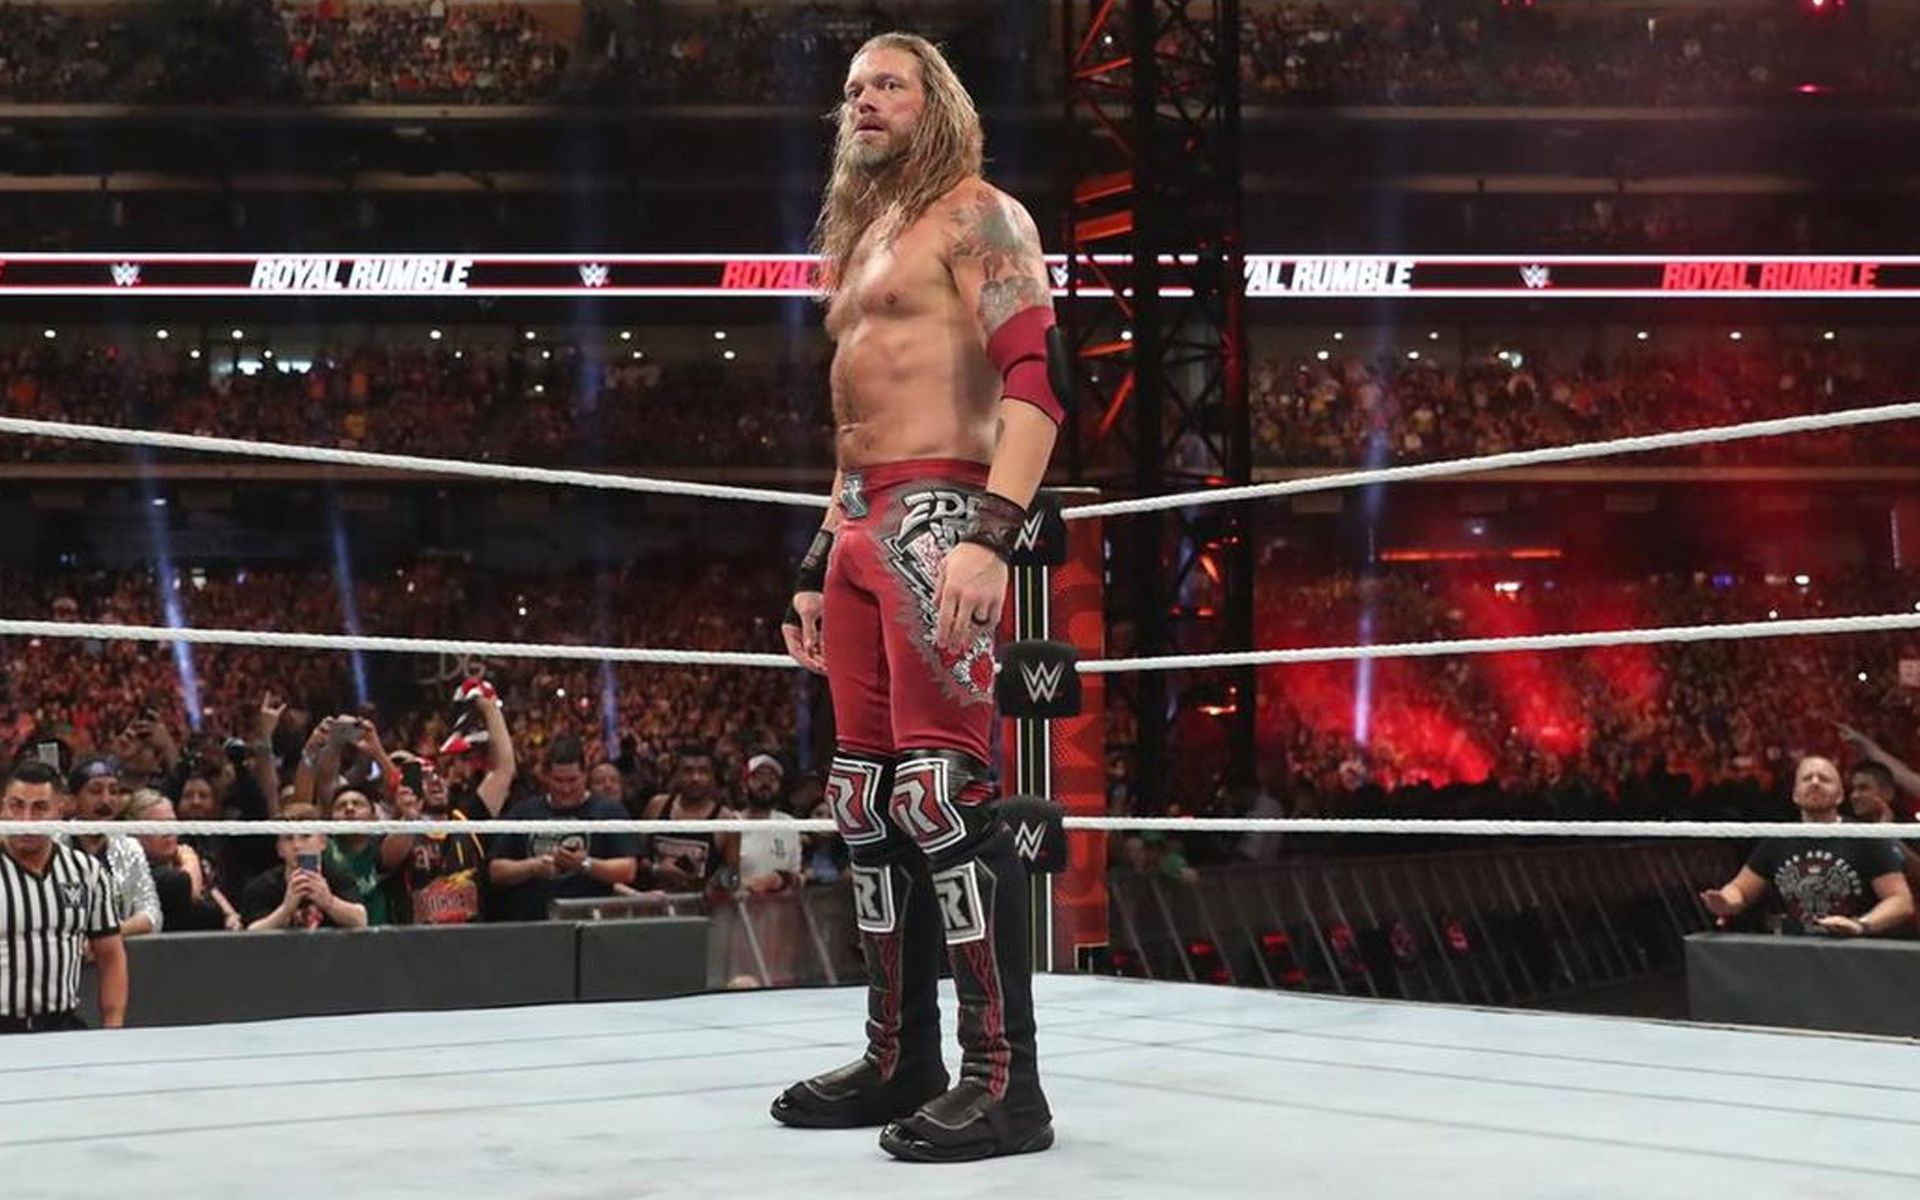 Edge is rumored to wrestle at SummerSlam 2023